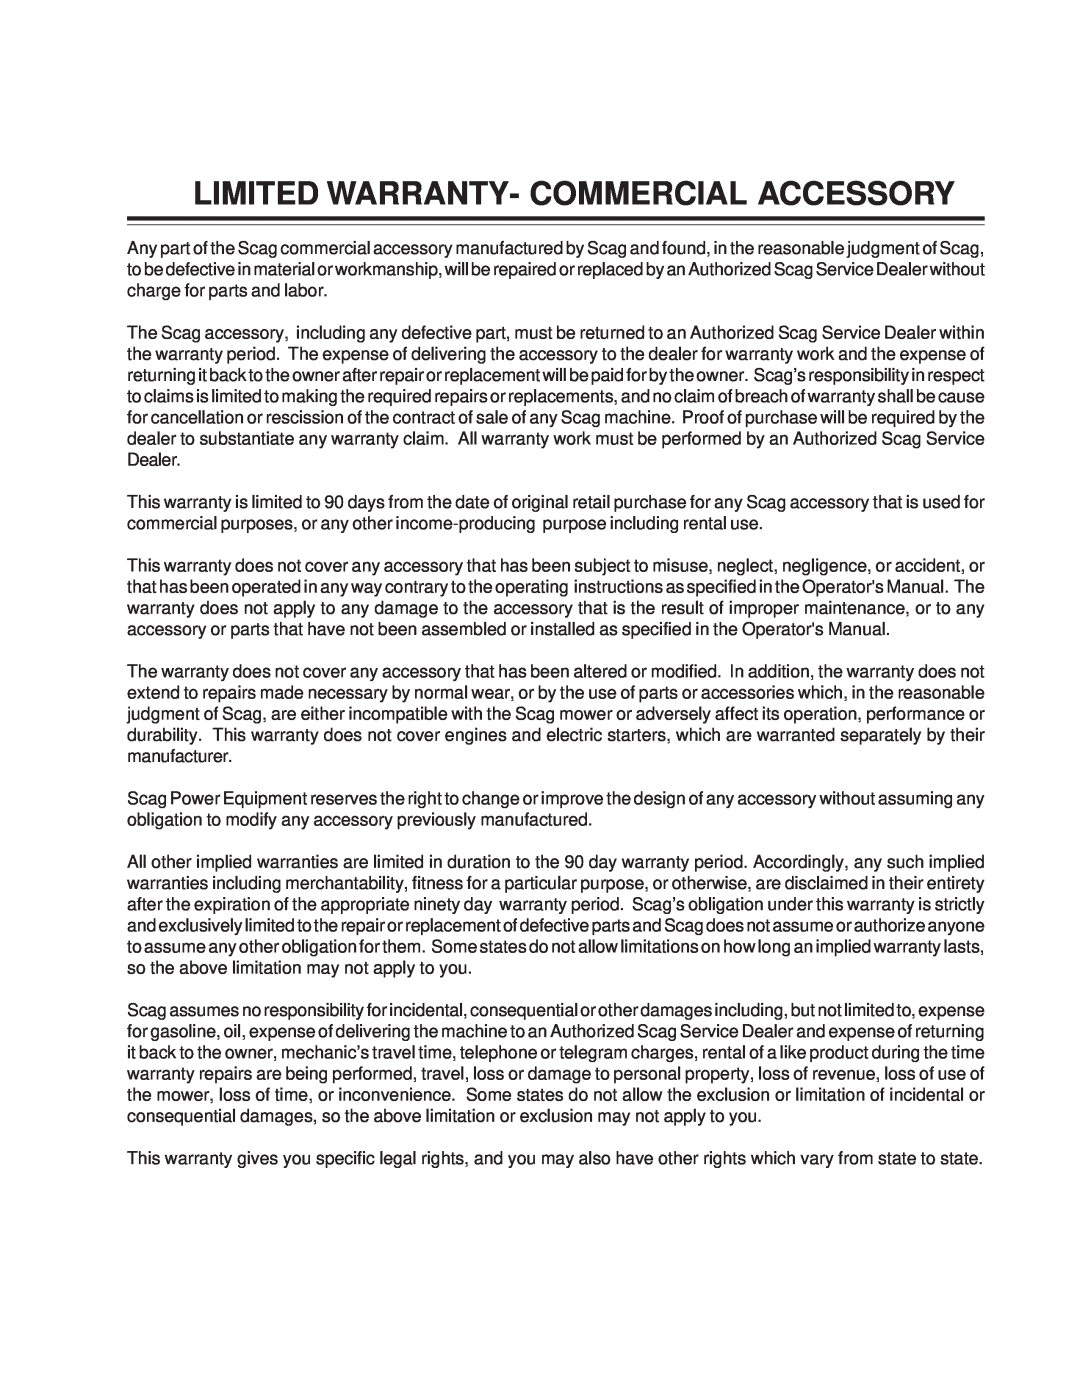 Scag Power Equipment GC-STT-CS manual Limited Warranty- Commercial Accessory 